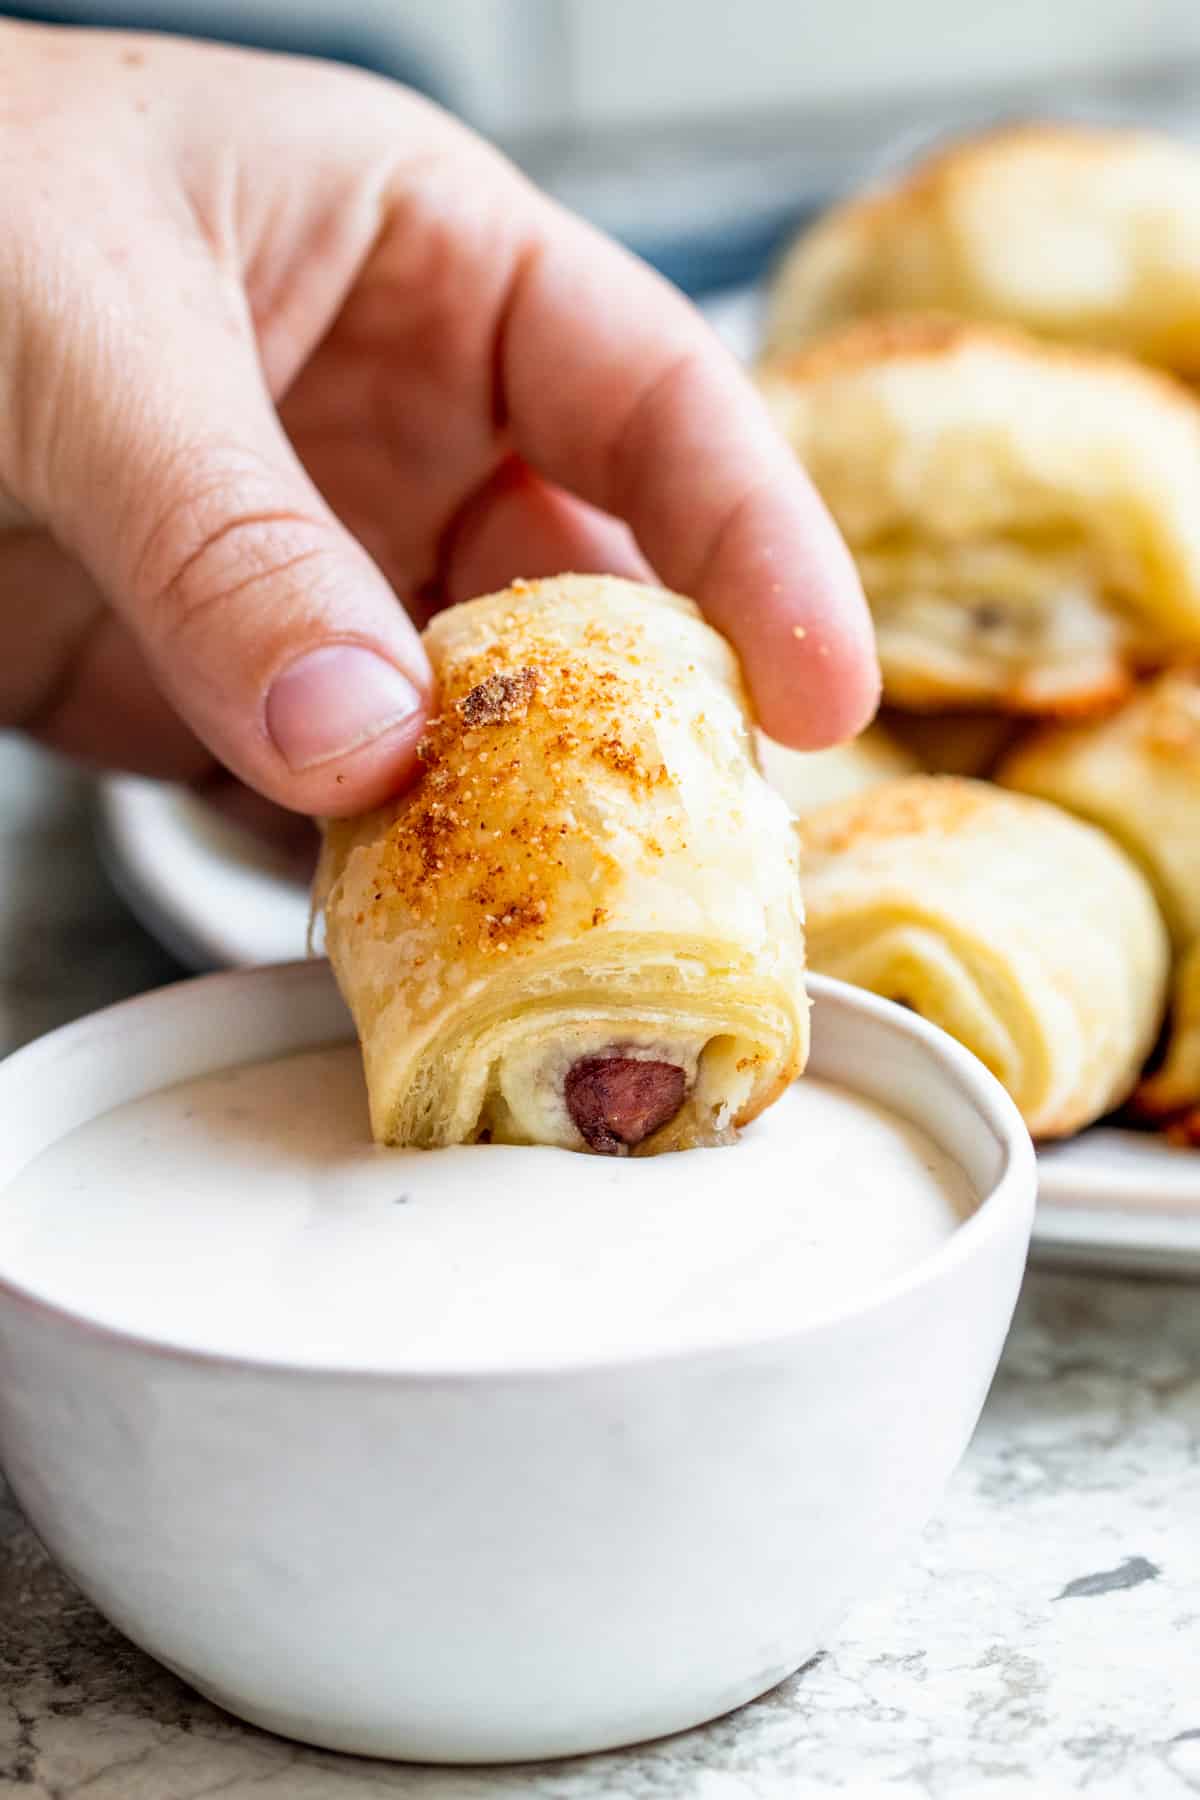 Hand dipping mini crescent dog into ranch dressing.